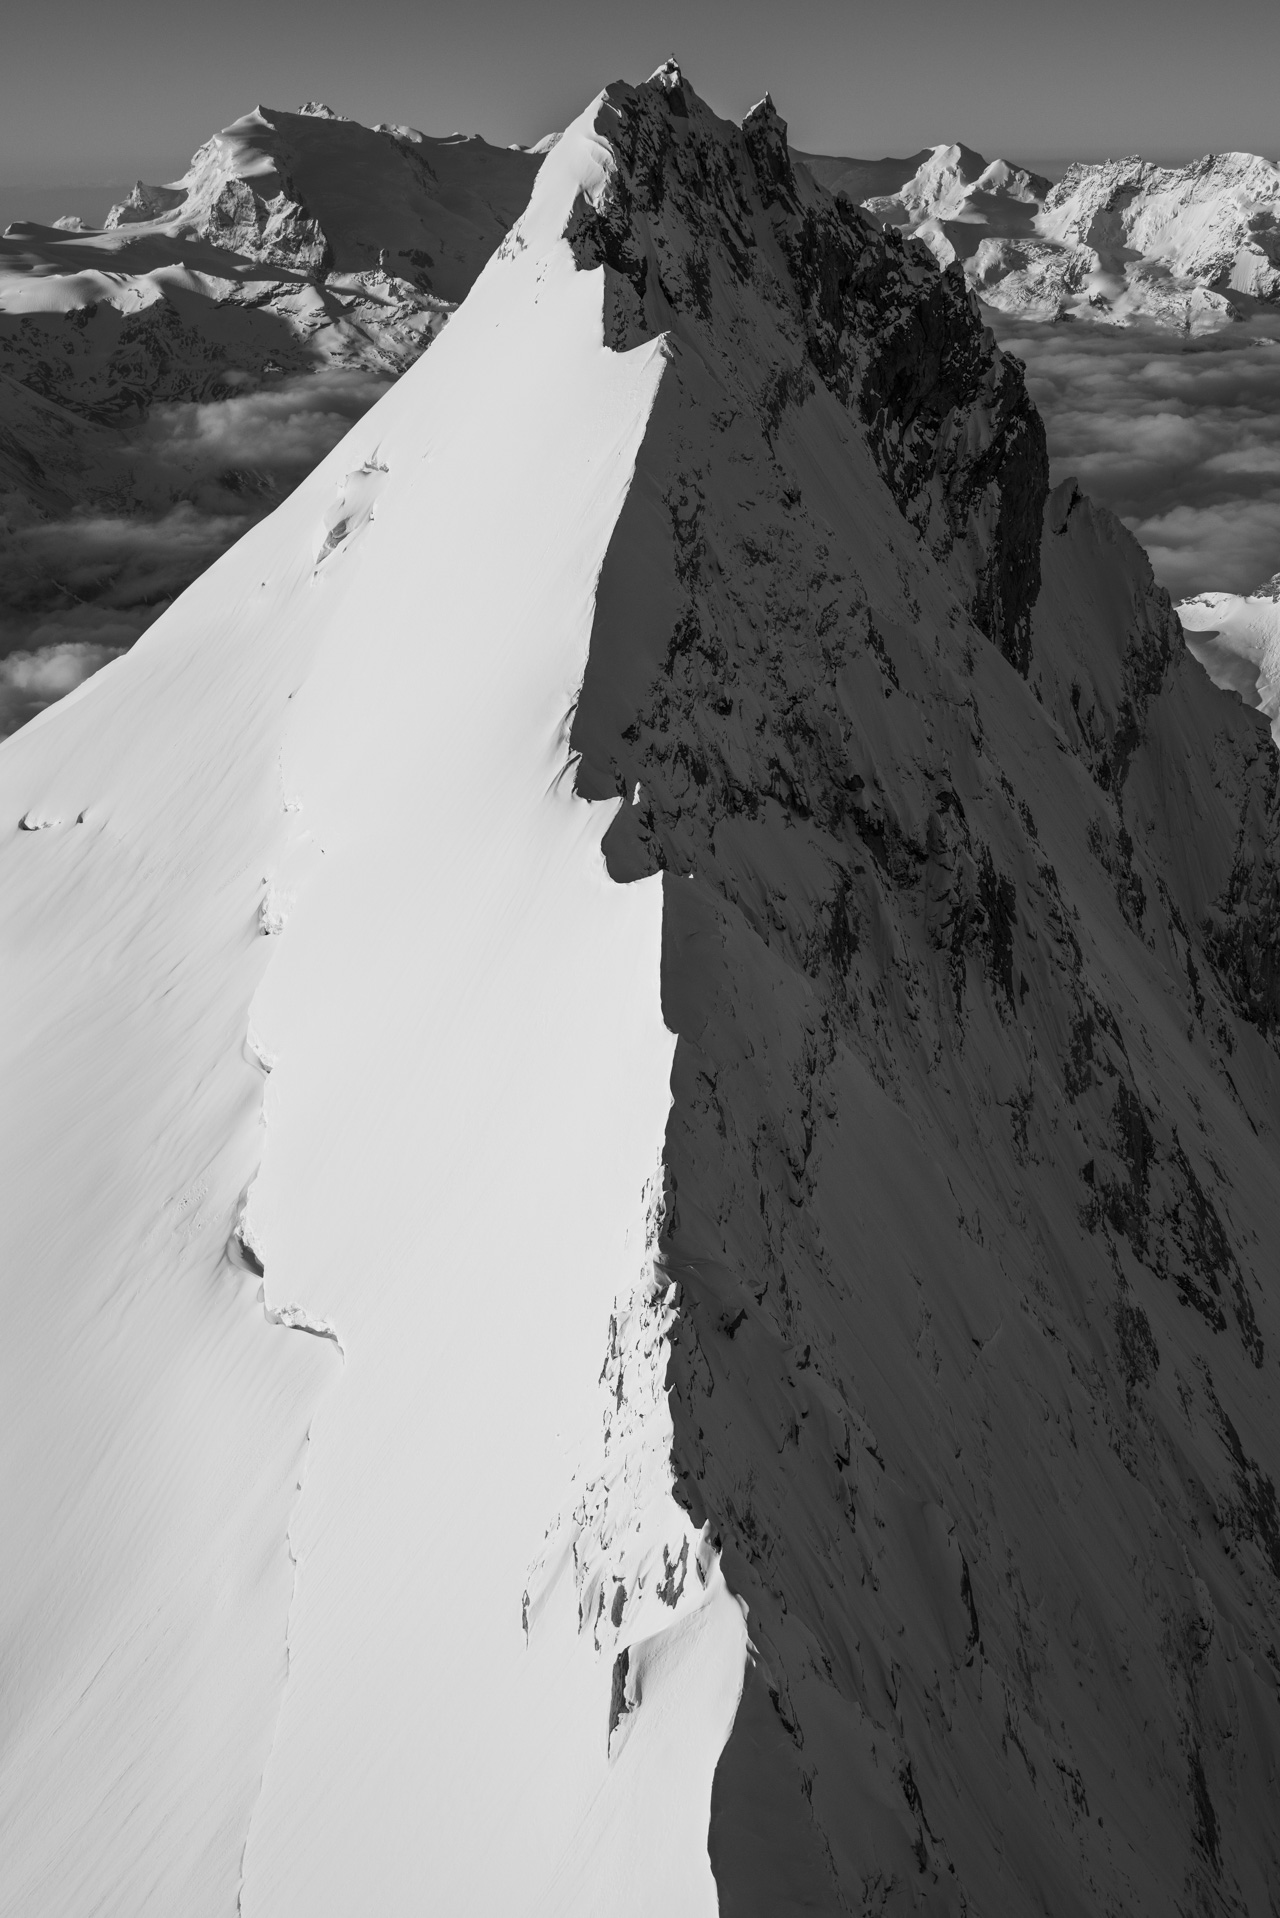 Black and white moutain photo of the northern weisshorn arete